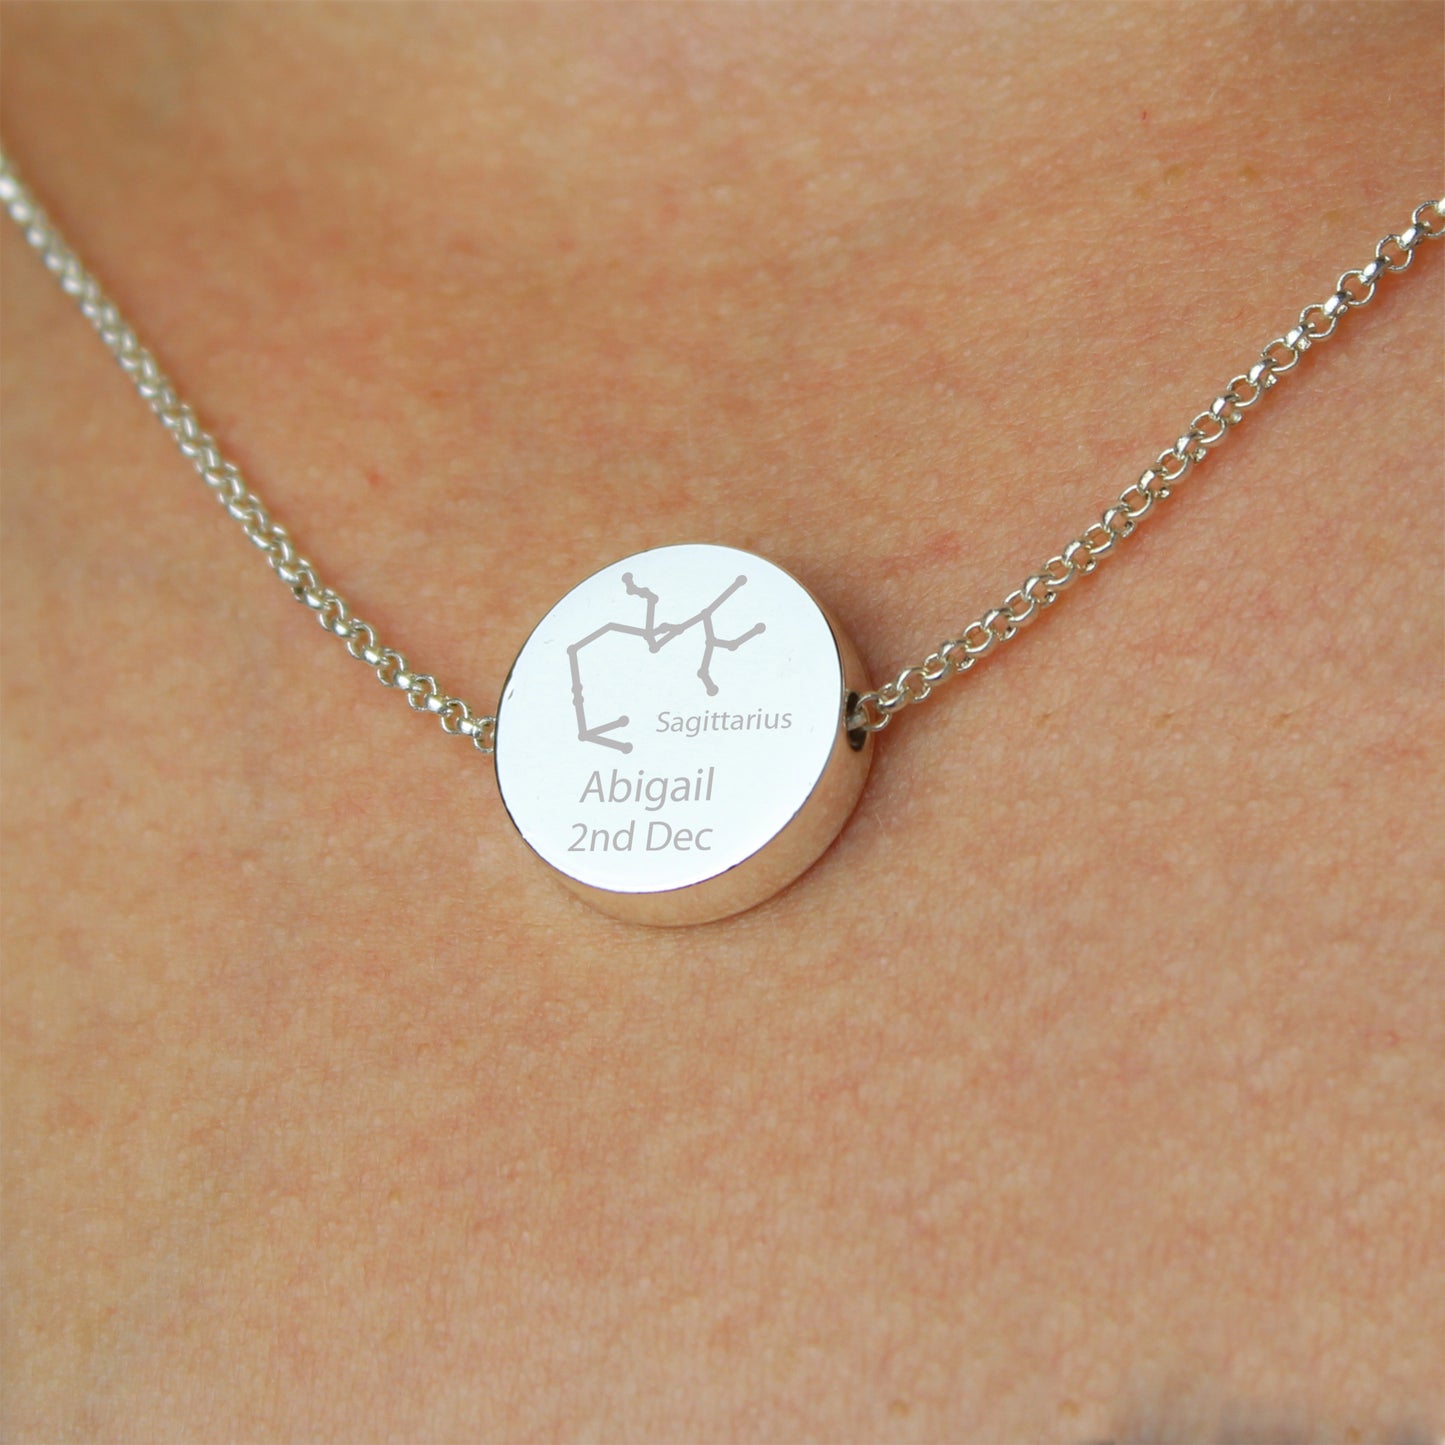 Personalised Sagittarius Zodiac Star Sign Silver Tone Necklace (November 22nd - December 21st) - Personalise It!